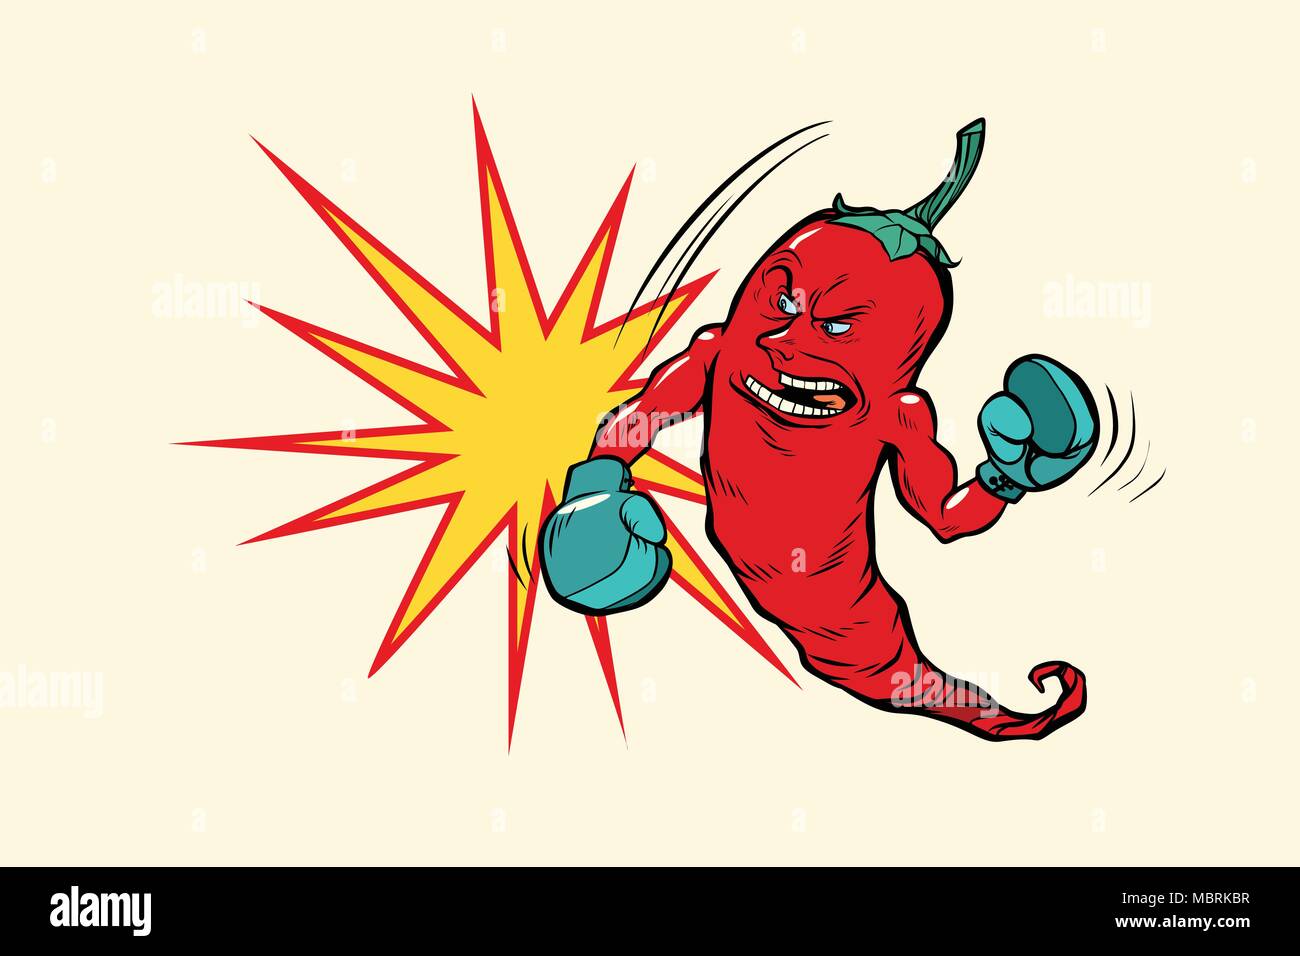 red chili pepper boxer character Stock Vector